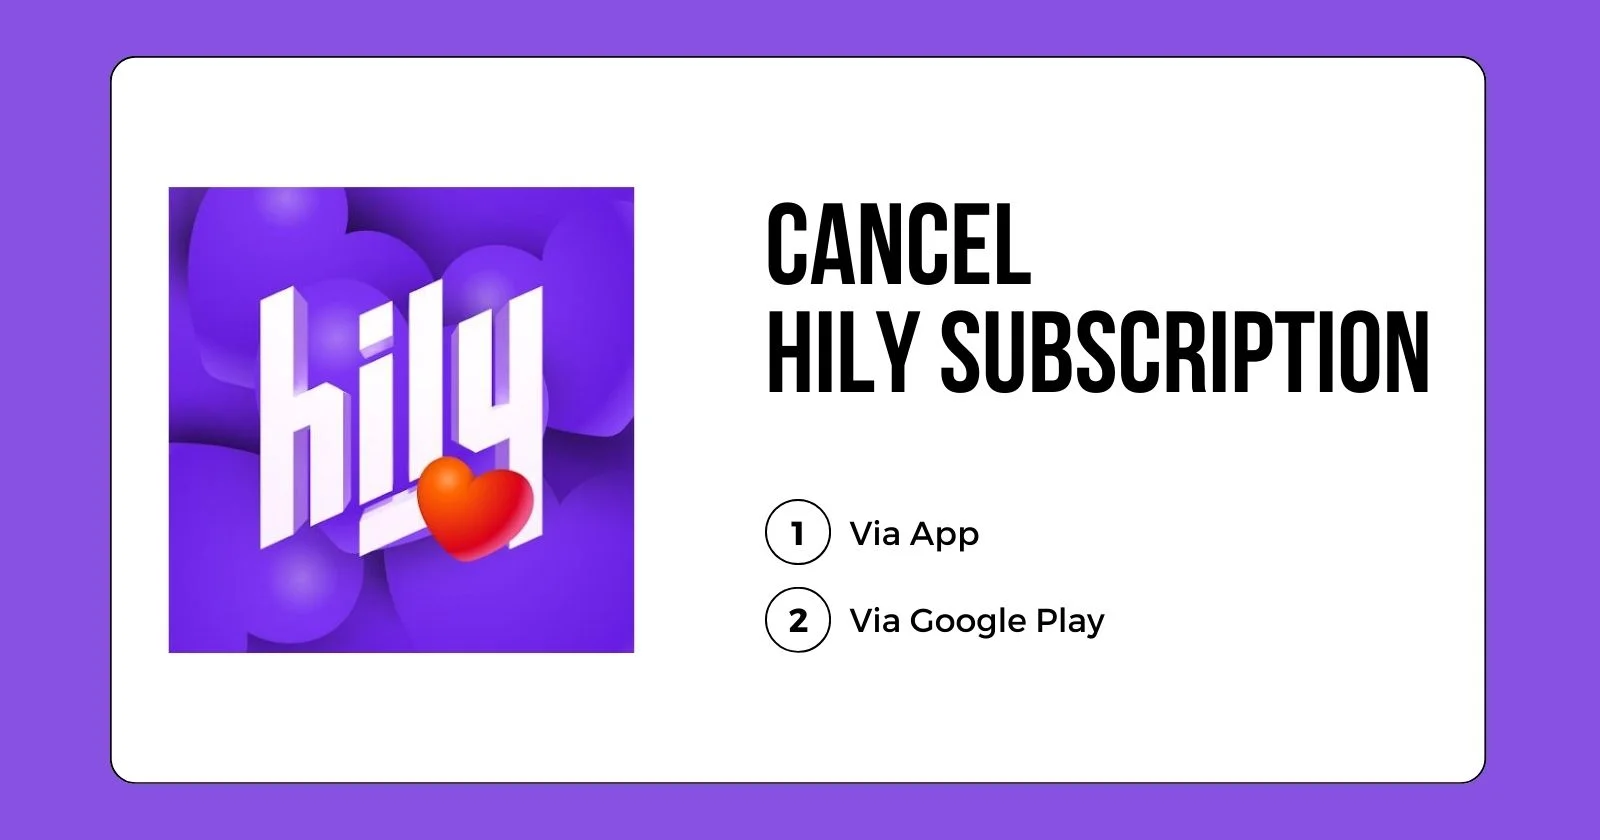 Cancel Hily Subscription